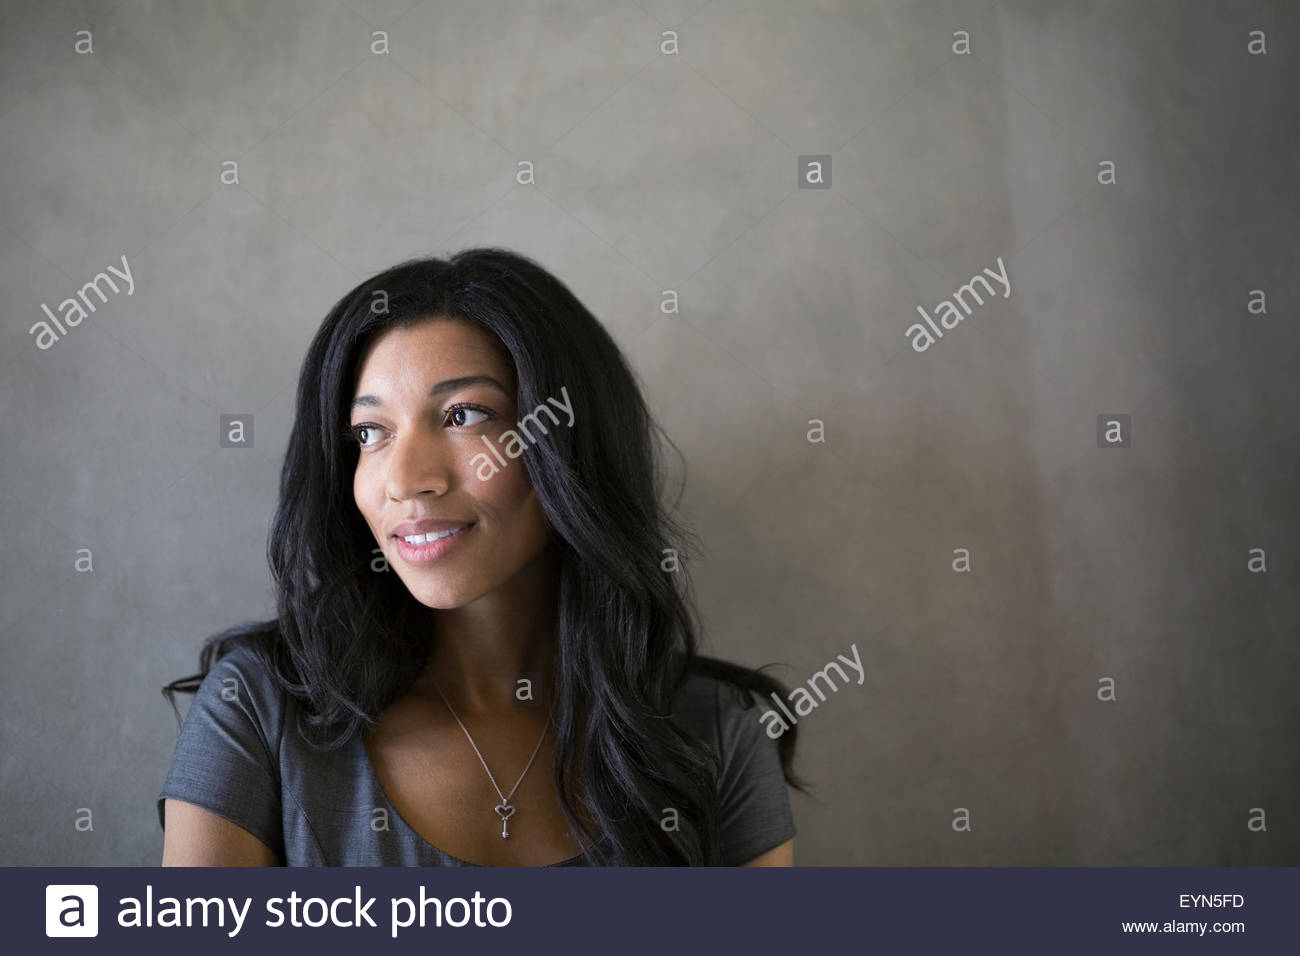 Pensive businesswoman with black hair looking away Stock Photo